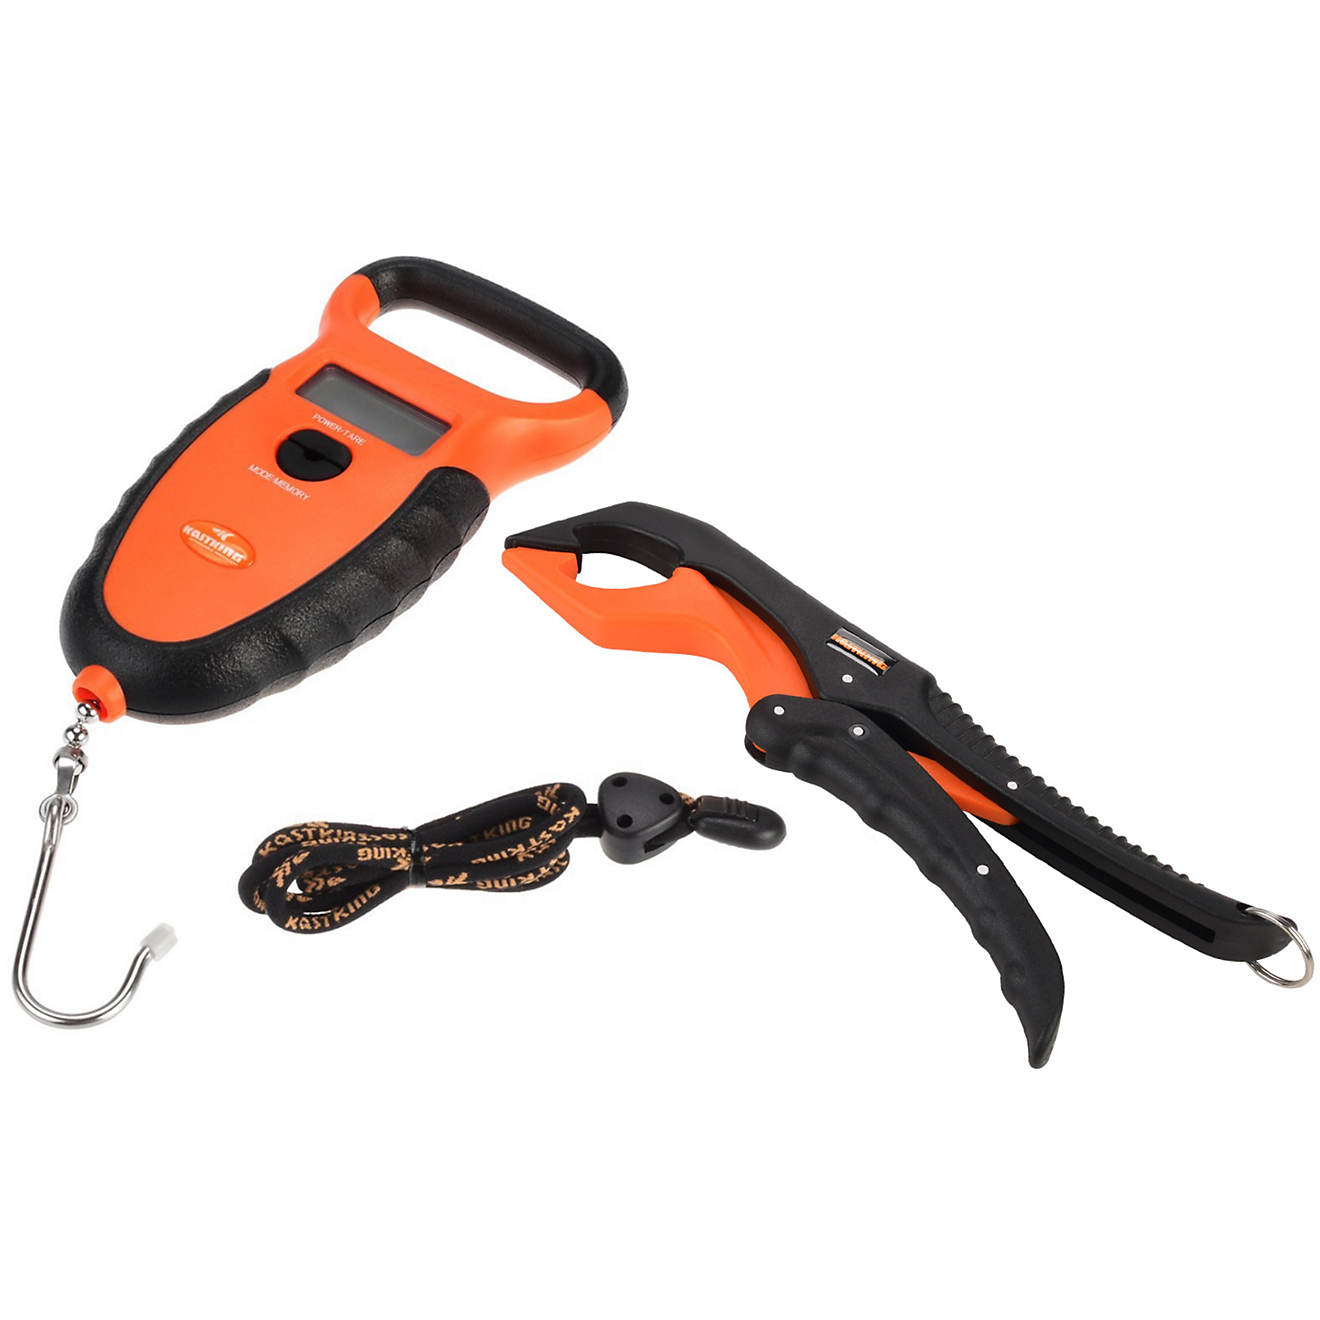 Fish Grabber with Measuring Tape and Adjustable Wrist Strap CAIKEI Fish Lip Gripper with Digital Scale Waterproof Lip Grip Battery Powered Not Included